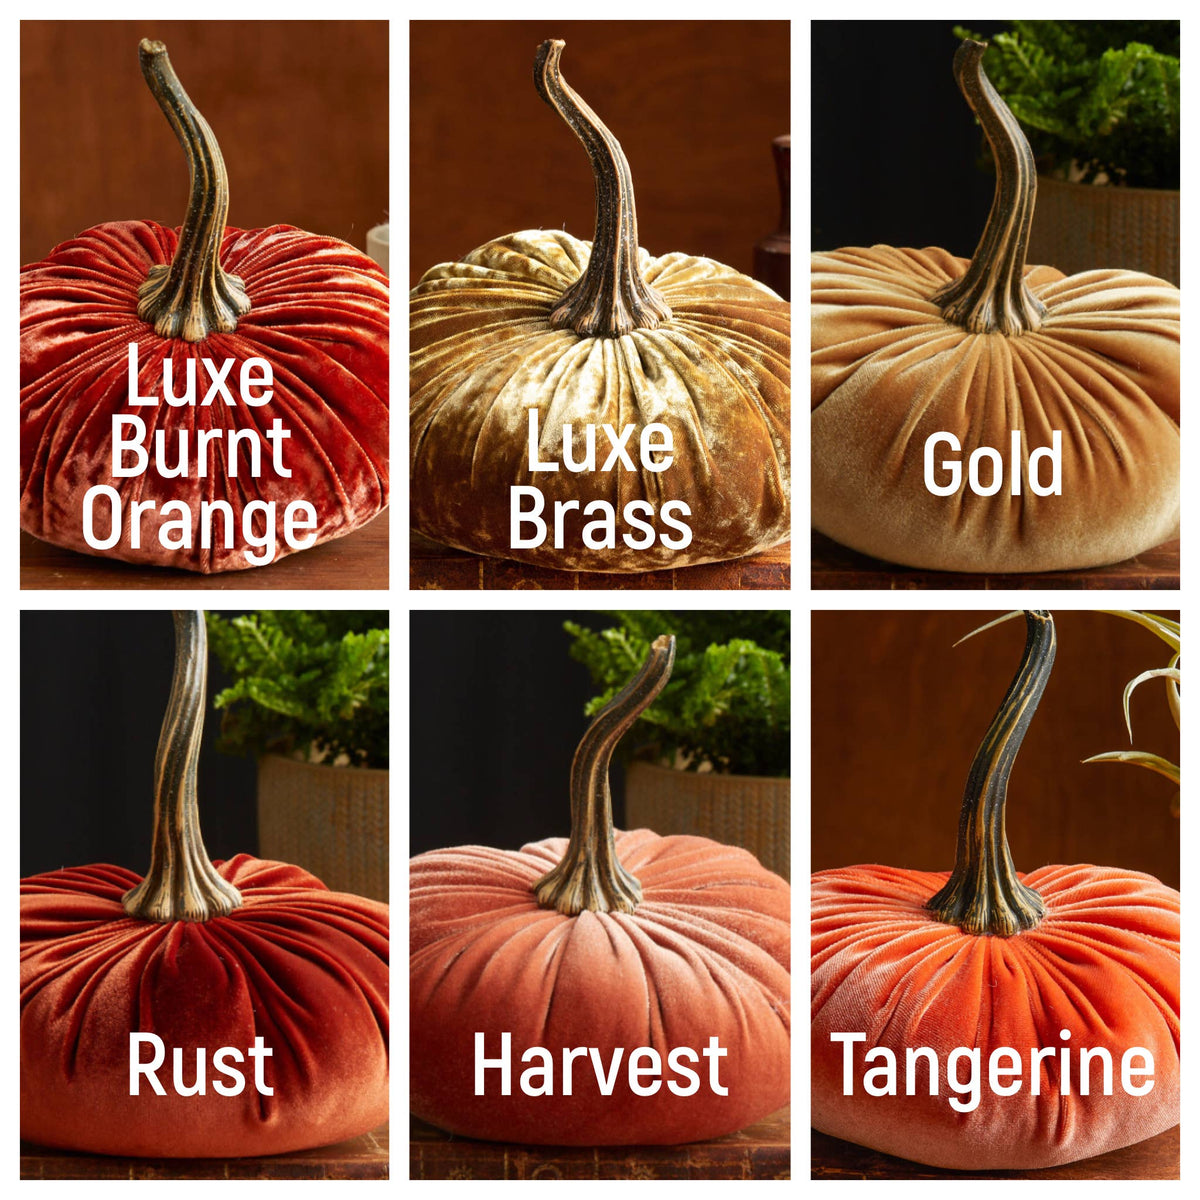 Orange and Gold Pumpkin Color Swatches